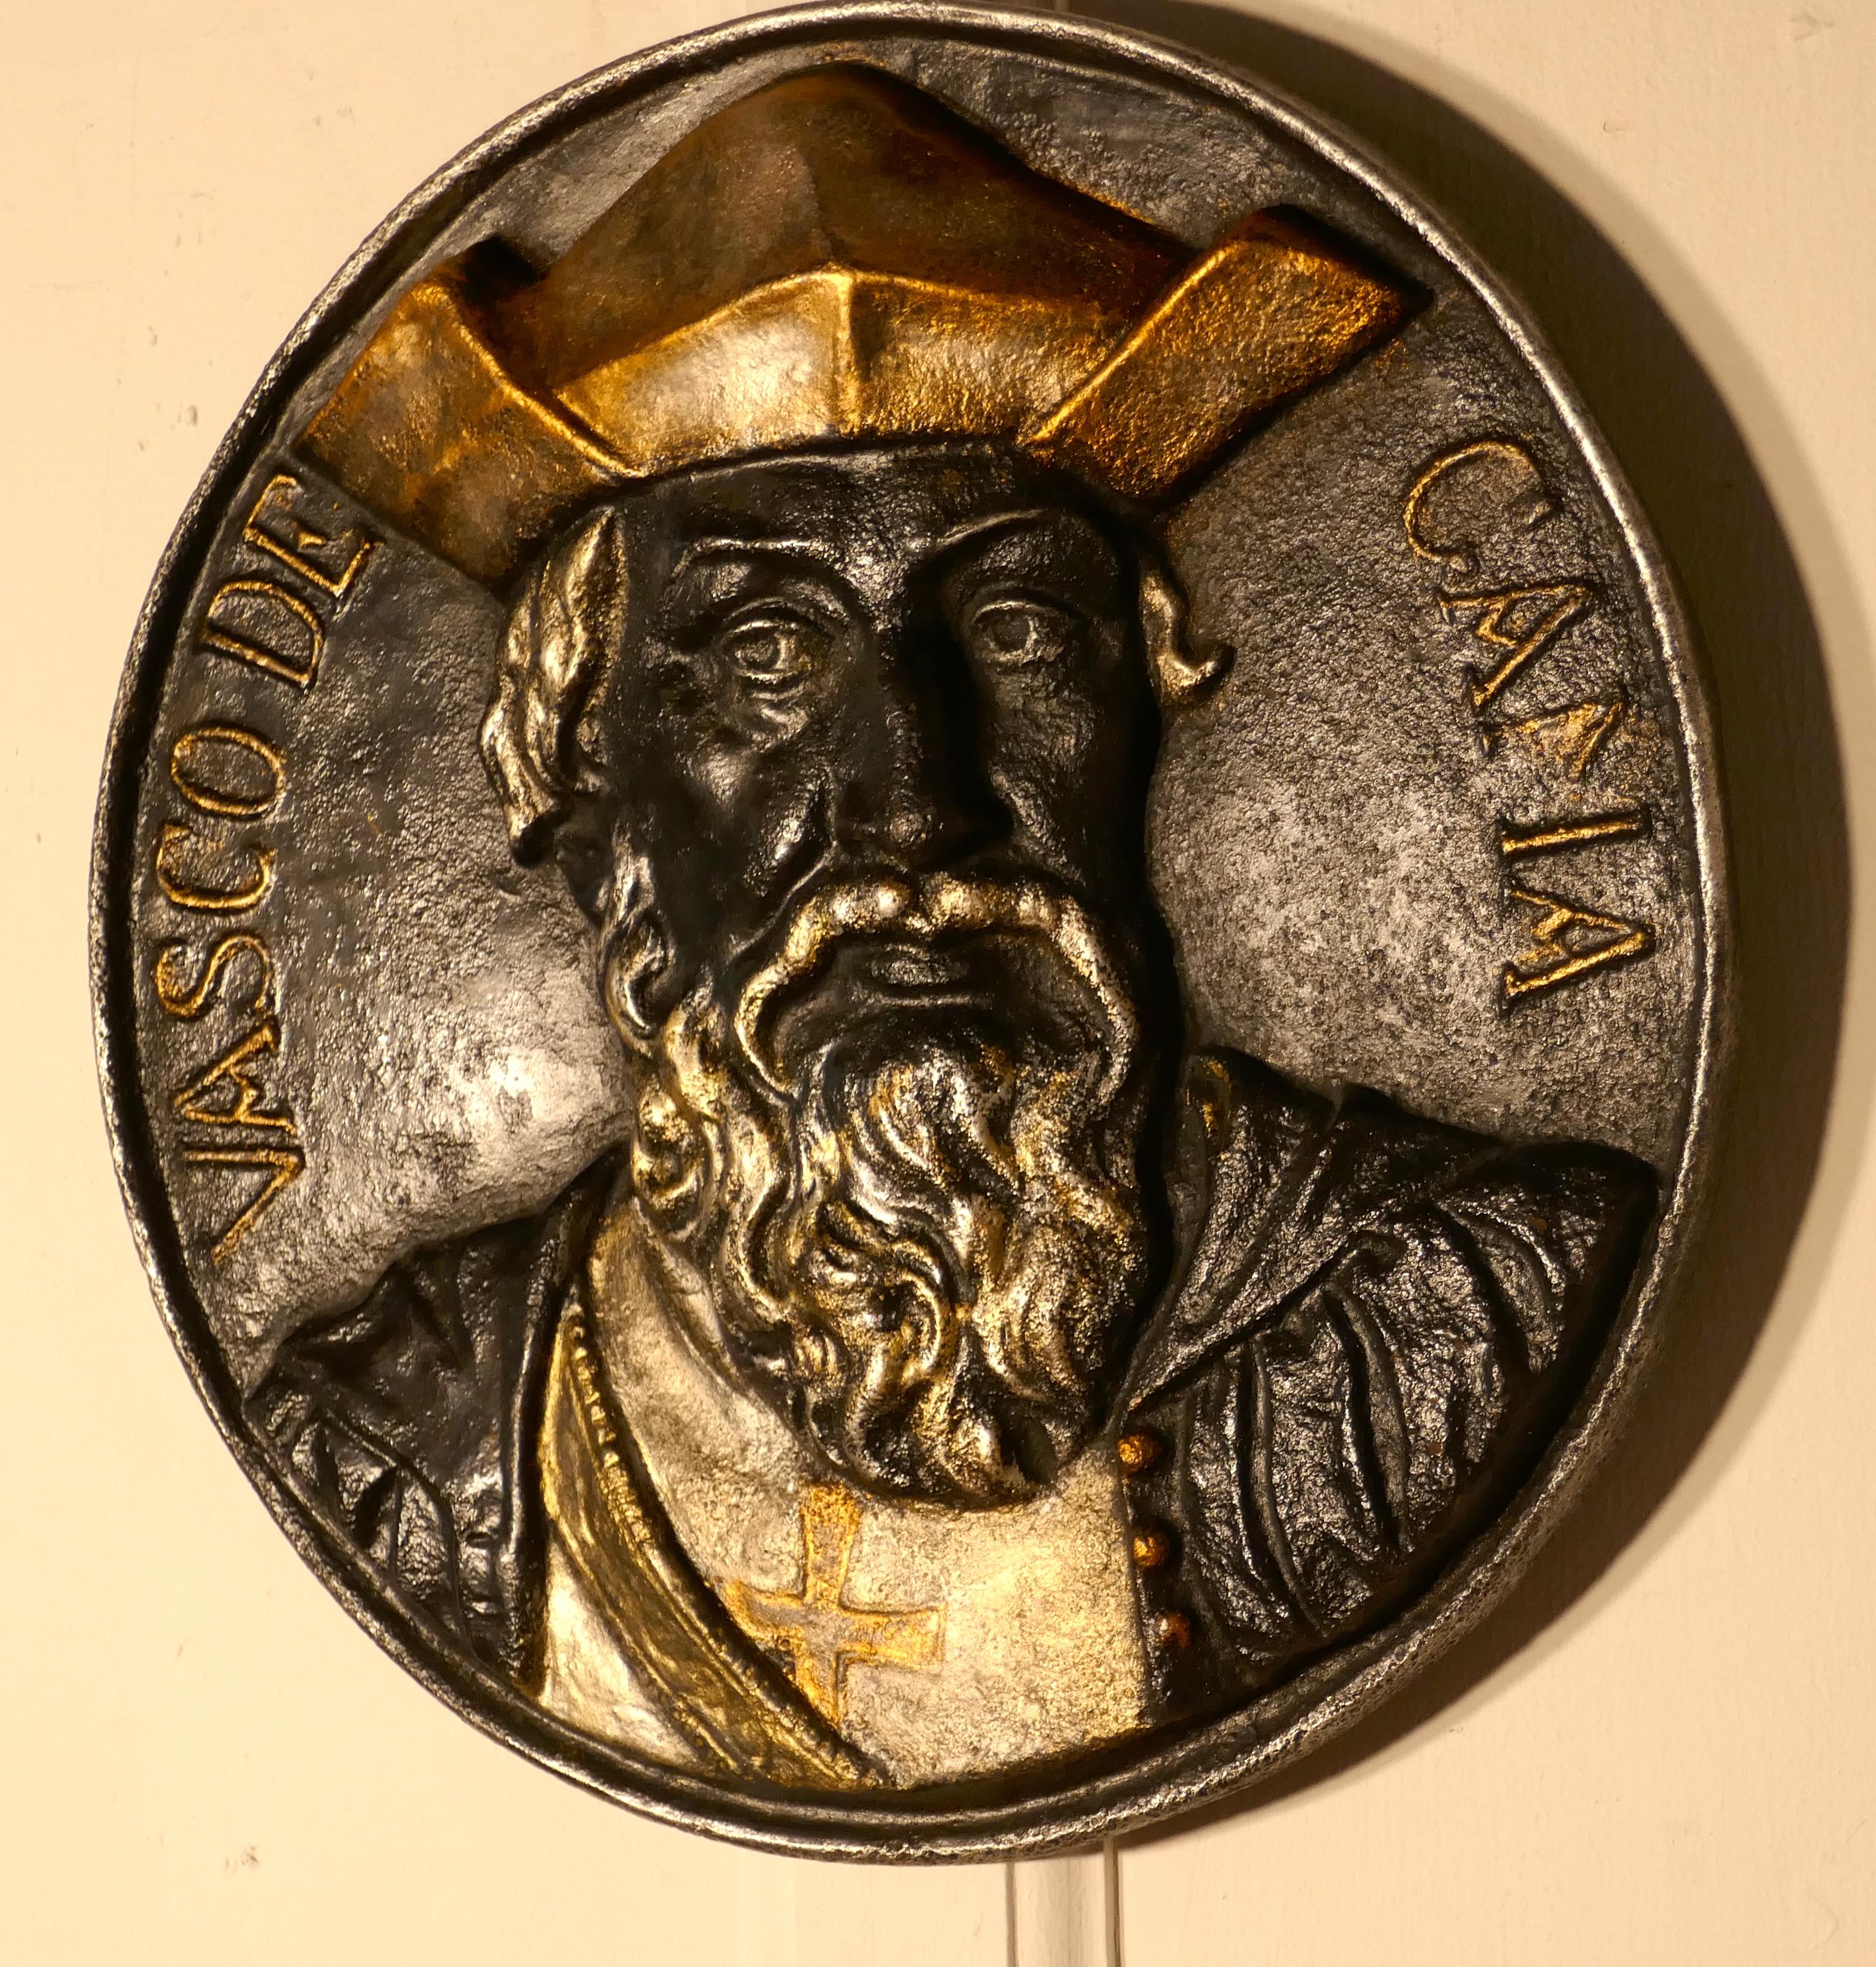 19th century cast iron bust portrait plaque of explorer Vasco da Gama 1460-1524

Cast iron bust portrait plaque of the Portuguese explorer Vasco da Gama changed the world by opening the seas
From Europe to India 

A superb and very rare piece